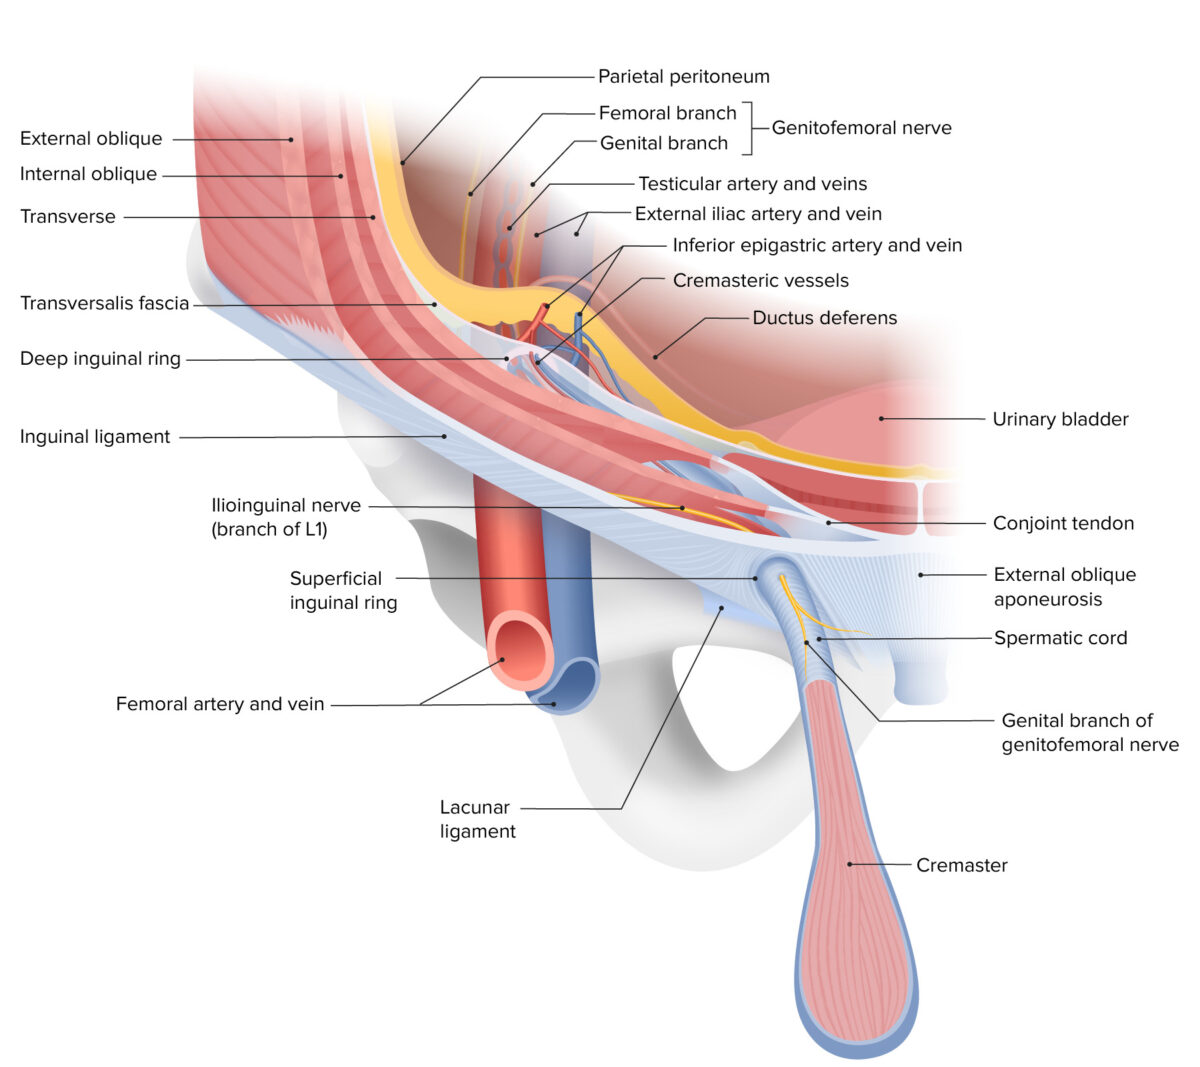 The layers of the anterior abdominal wall